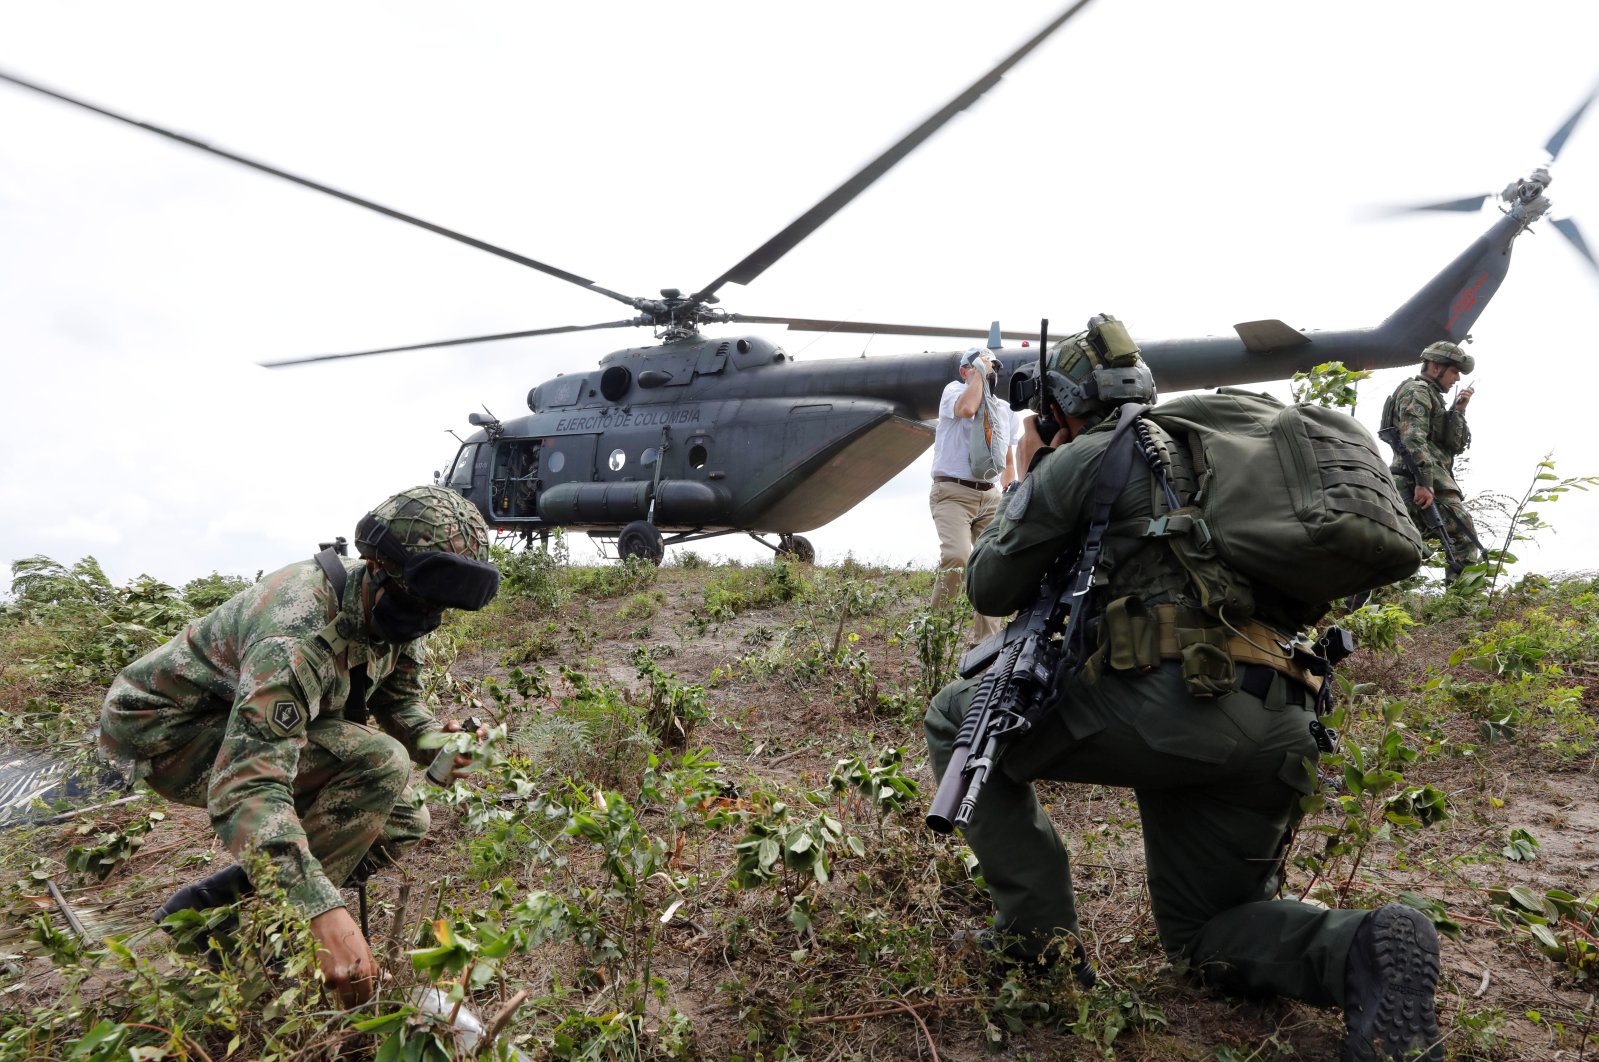 Members of the Colombian Police and Army arrive at a field to eradicate illicit crops in the rural area of San Pablo, south of the Bolivar department, Colombia, Dec. 30, 2021. (EPA/Carlos Ortega)